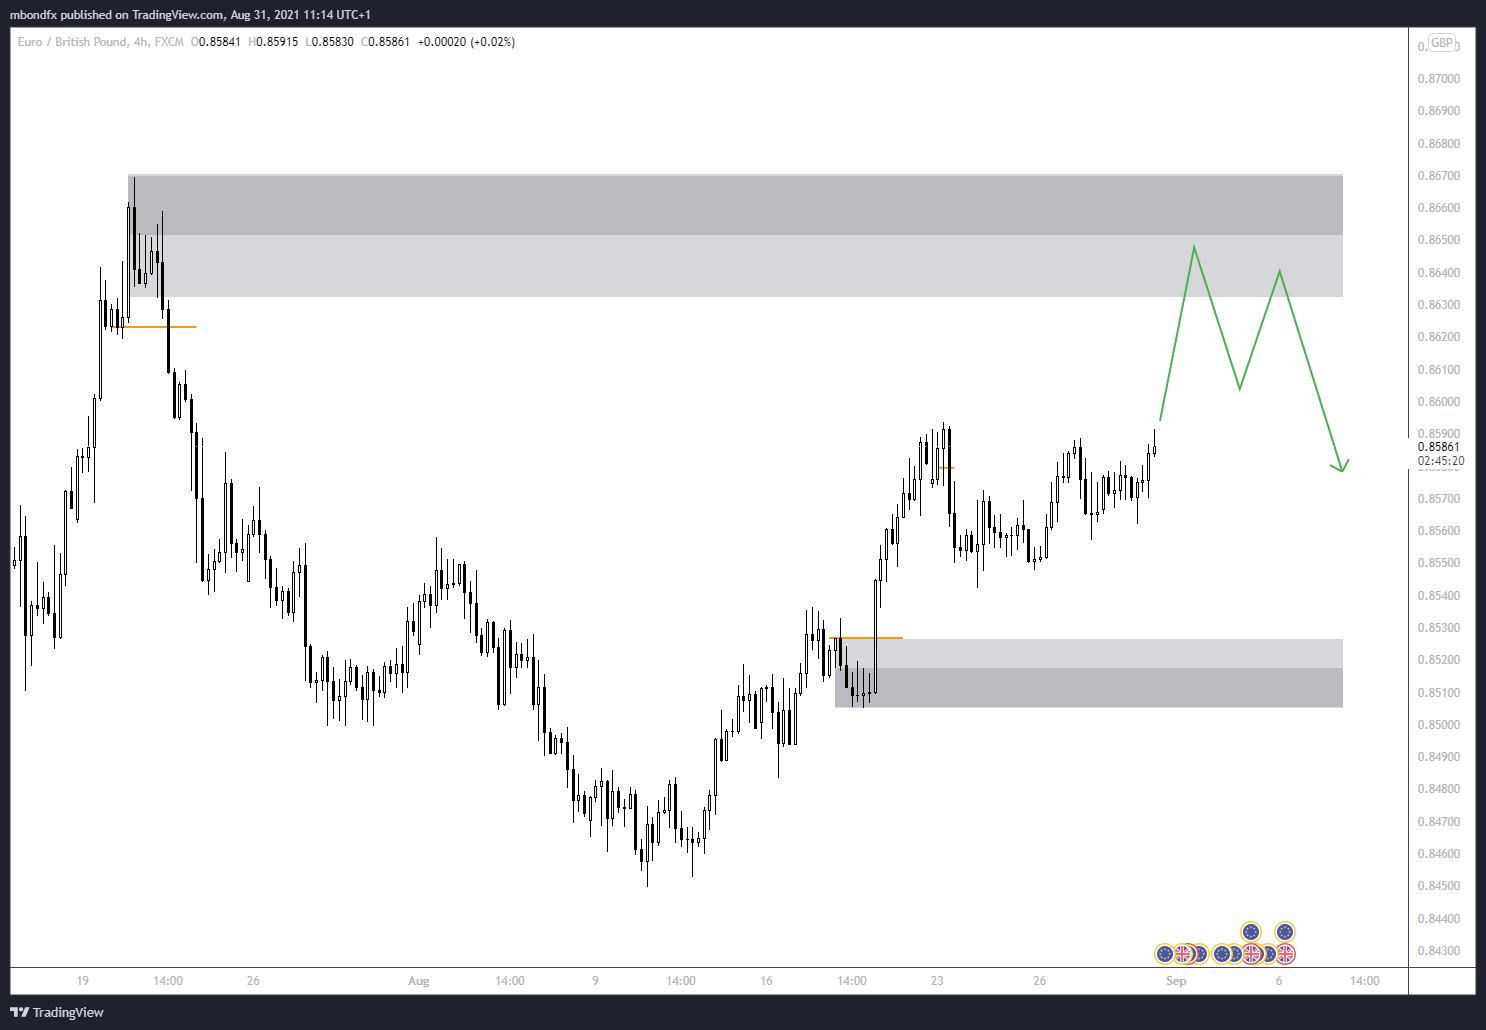 EUR/GBP H4 SUPPLY ZONE